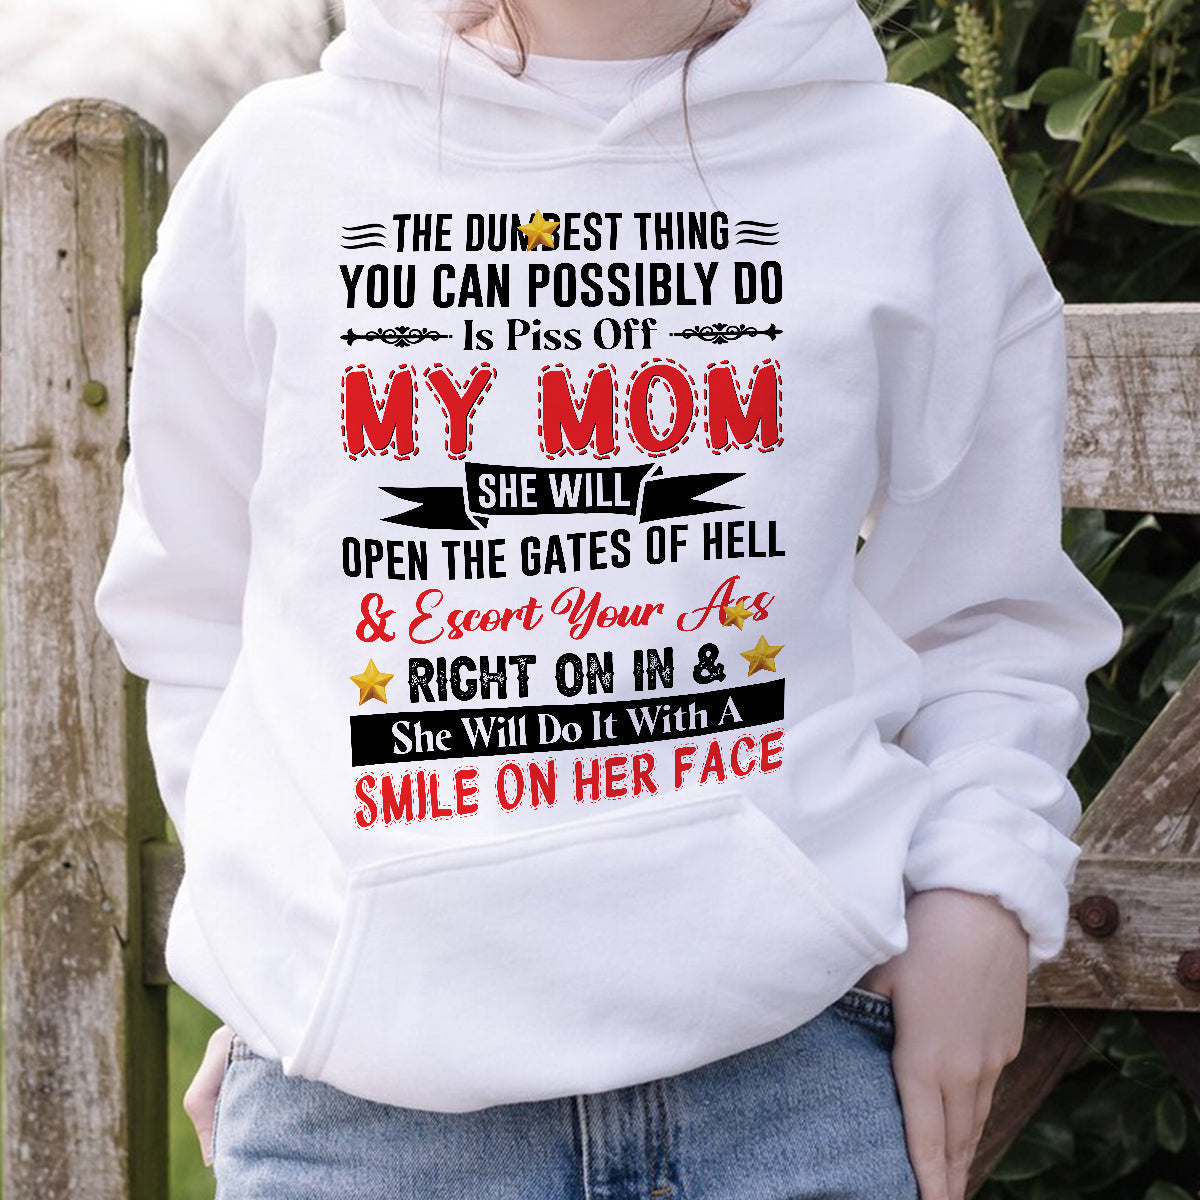 Teesdily | Mom Mother Day Shirt, Piss Off My Mom She Will Open The Gates Of Hell Tops, Humor Gift For Mom Unisex Tshirt Hoodie Sweatshirt Size S-5Xl / Mug 11-15Oz